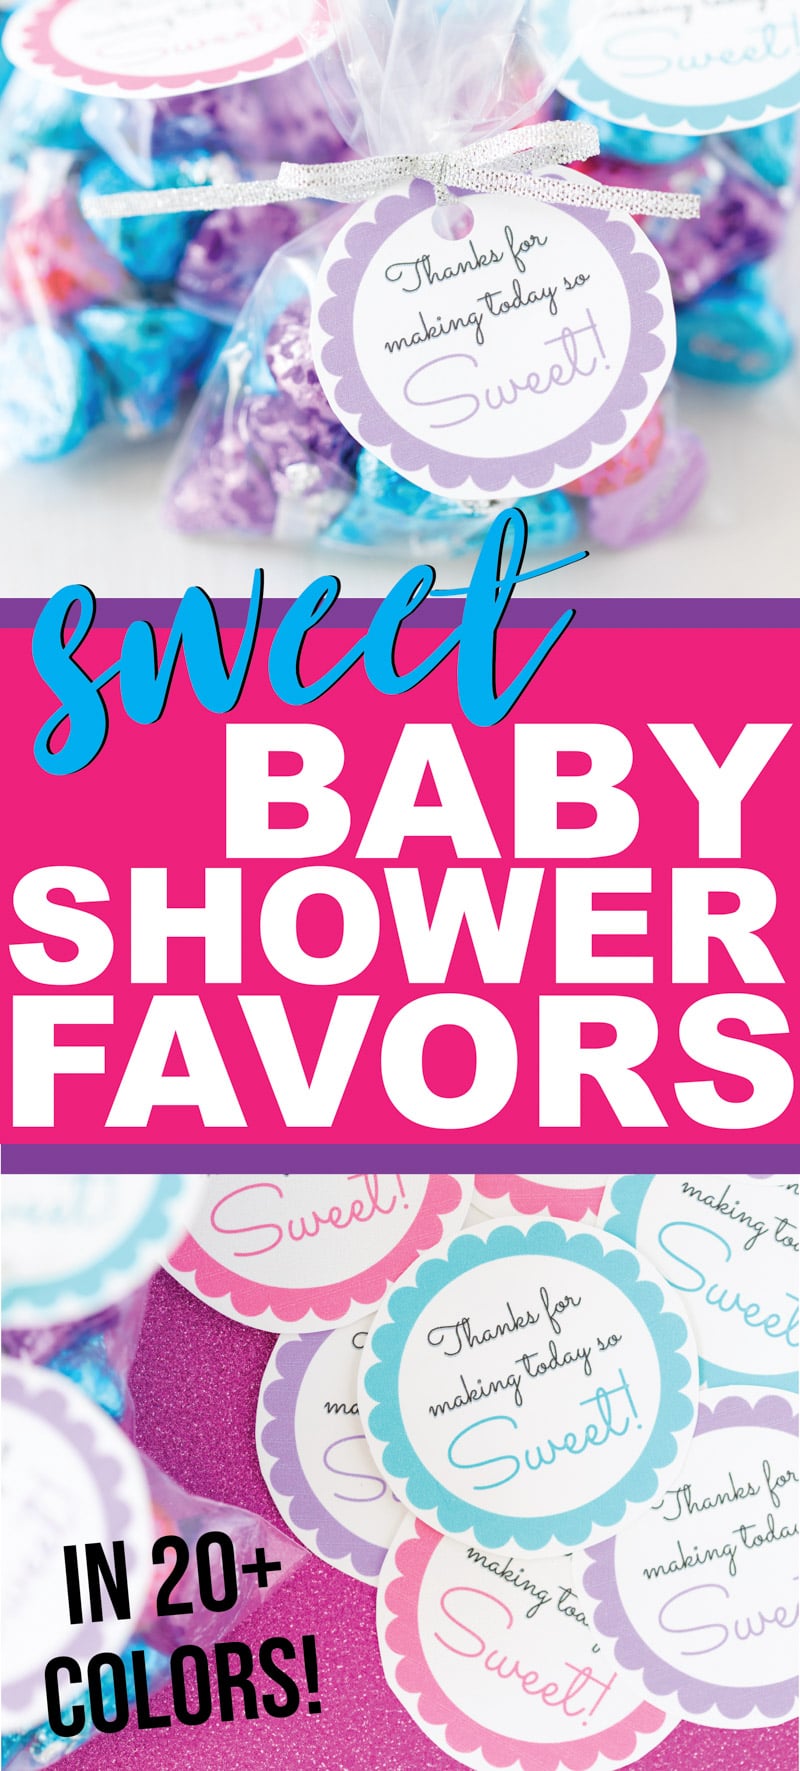 Thank You Baby Shower Tags Printable